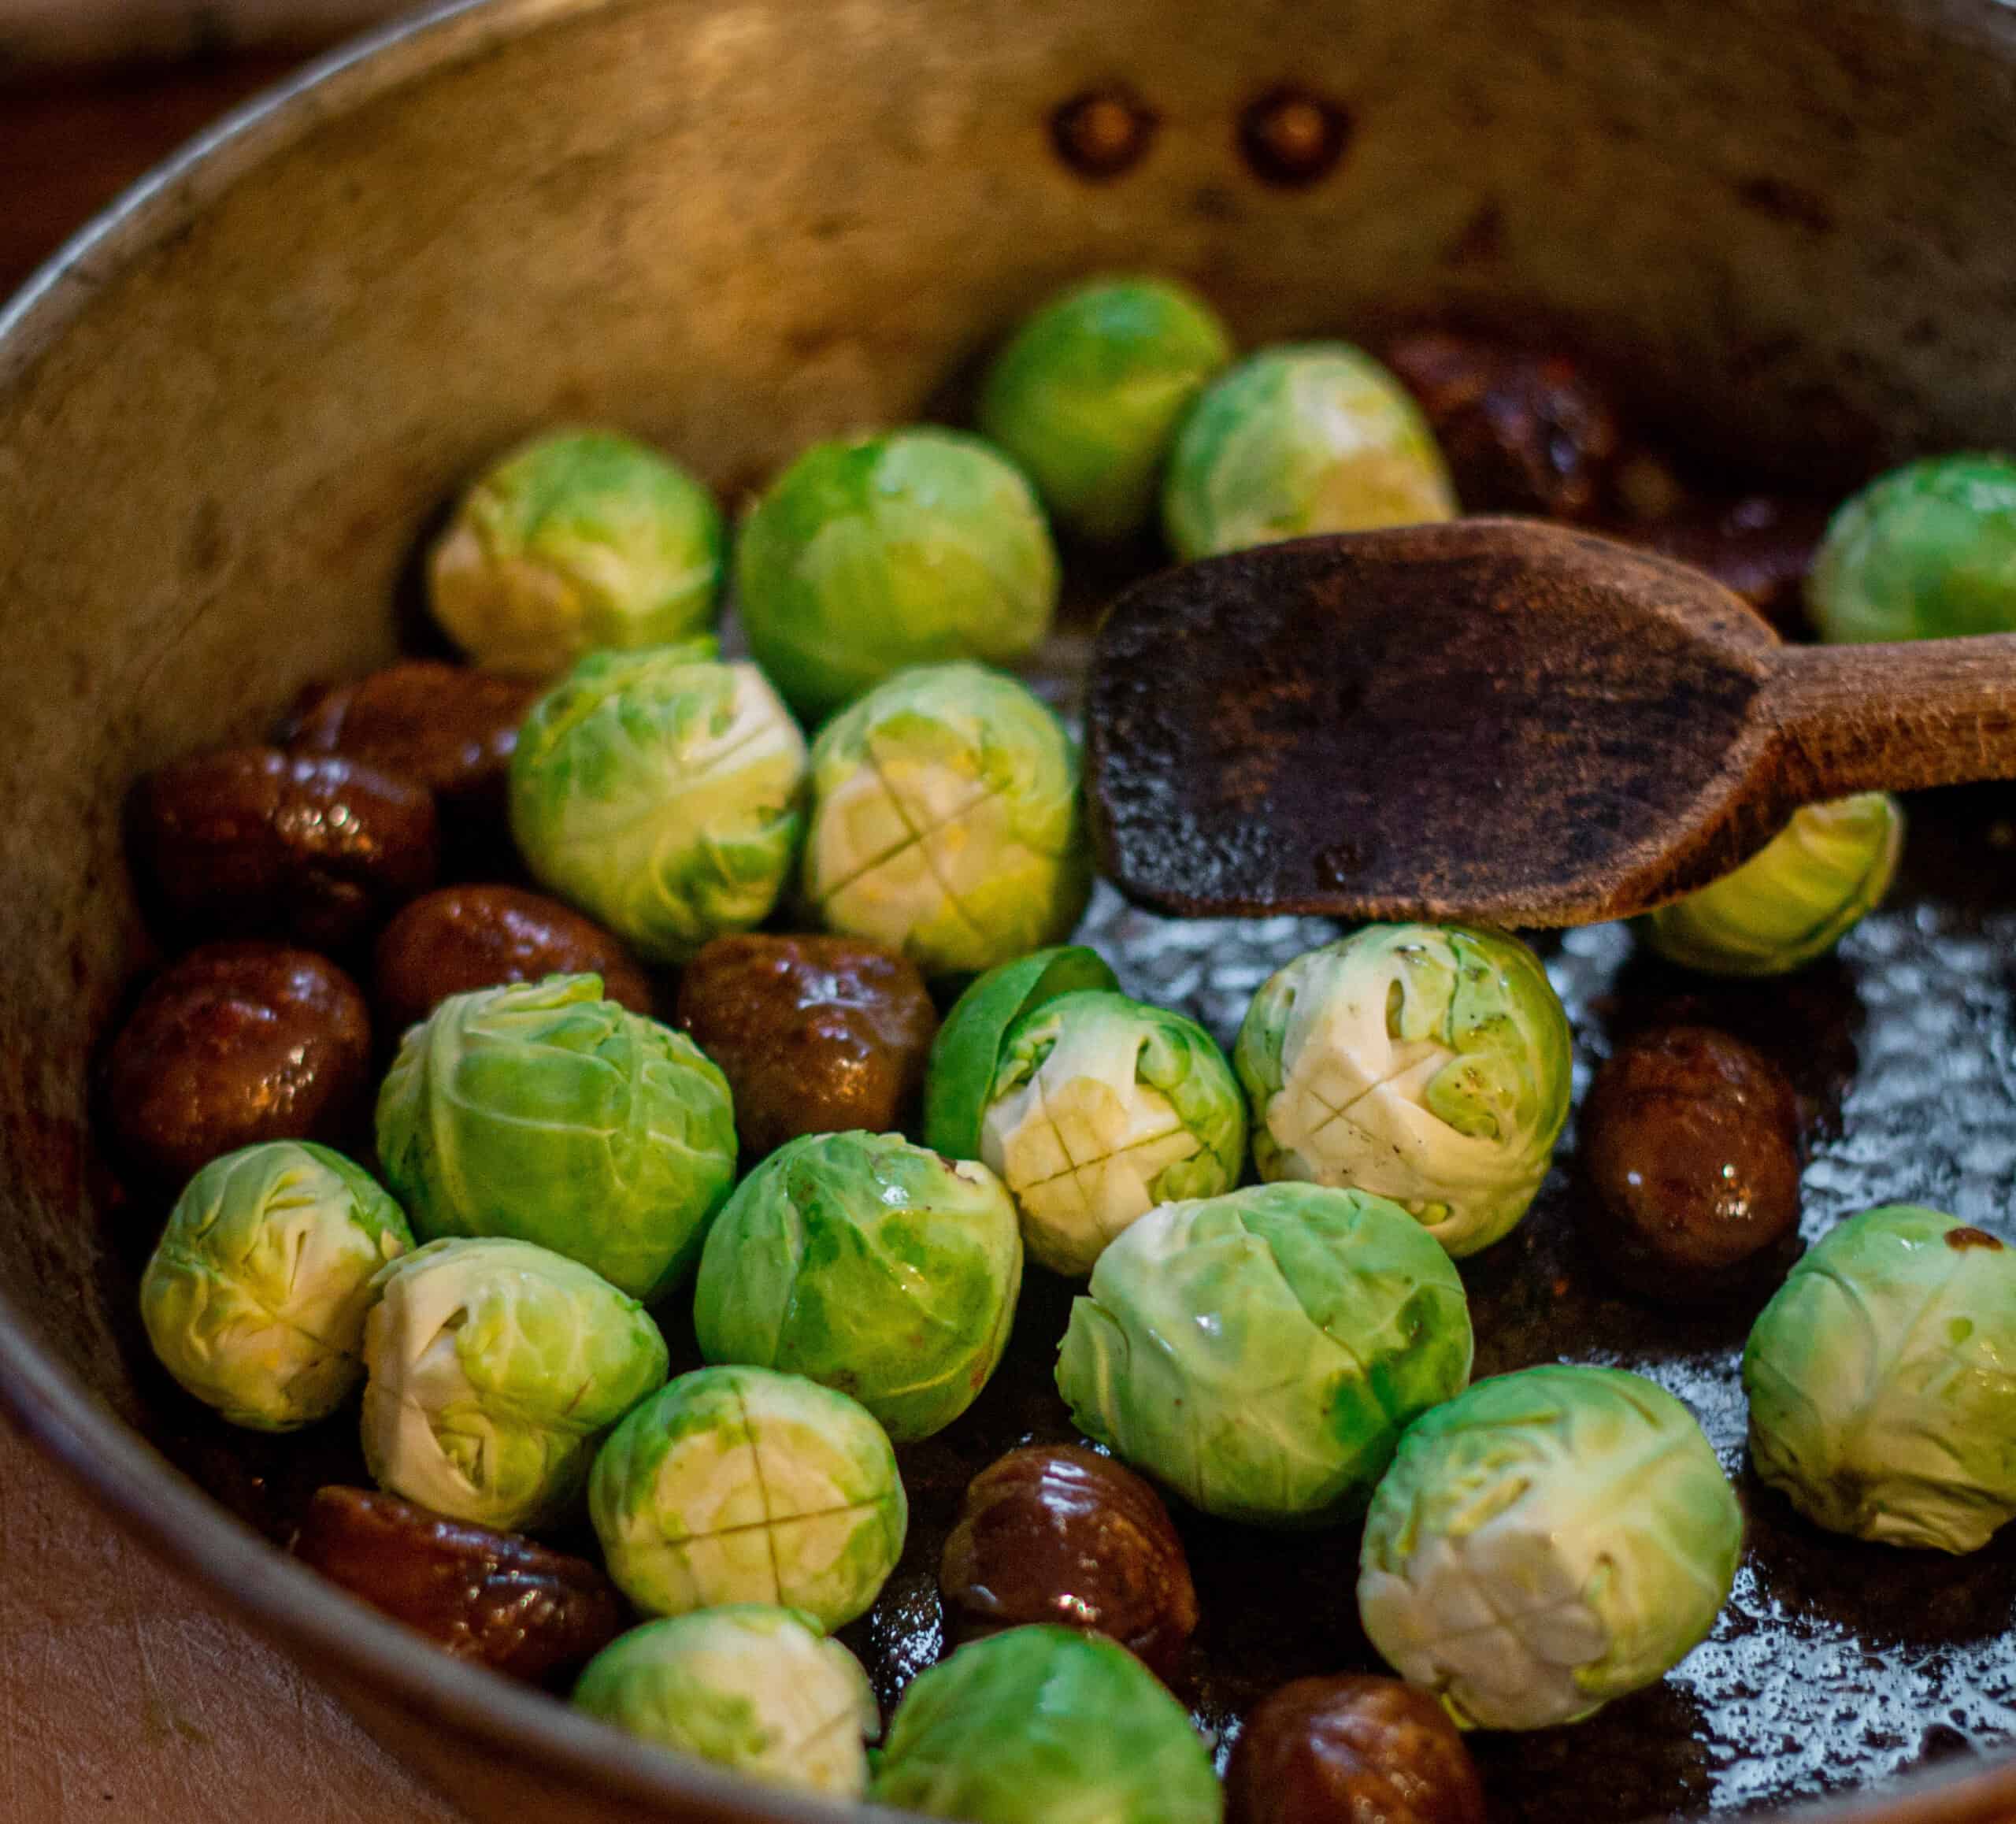 Adding sprouts to chestnuts